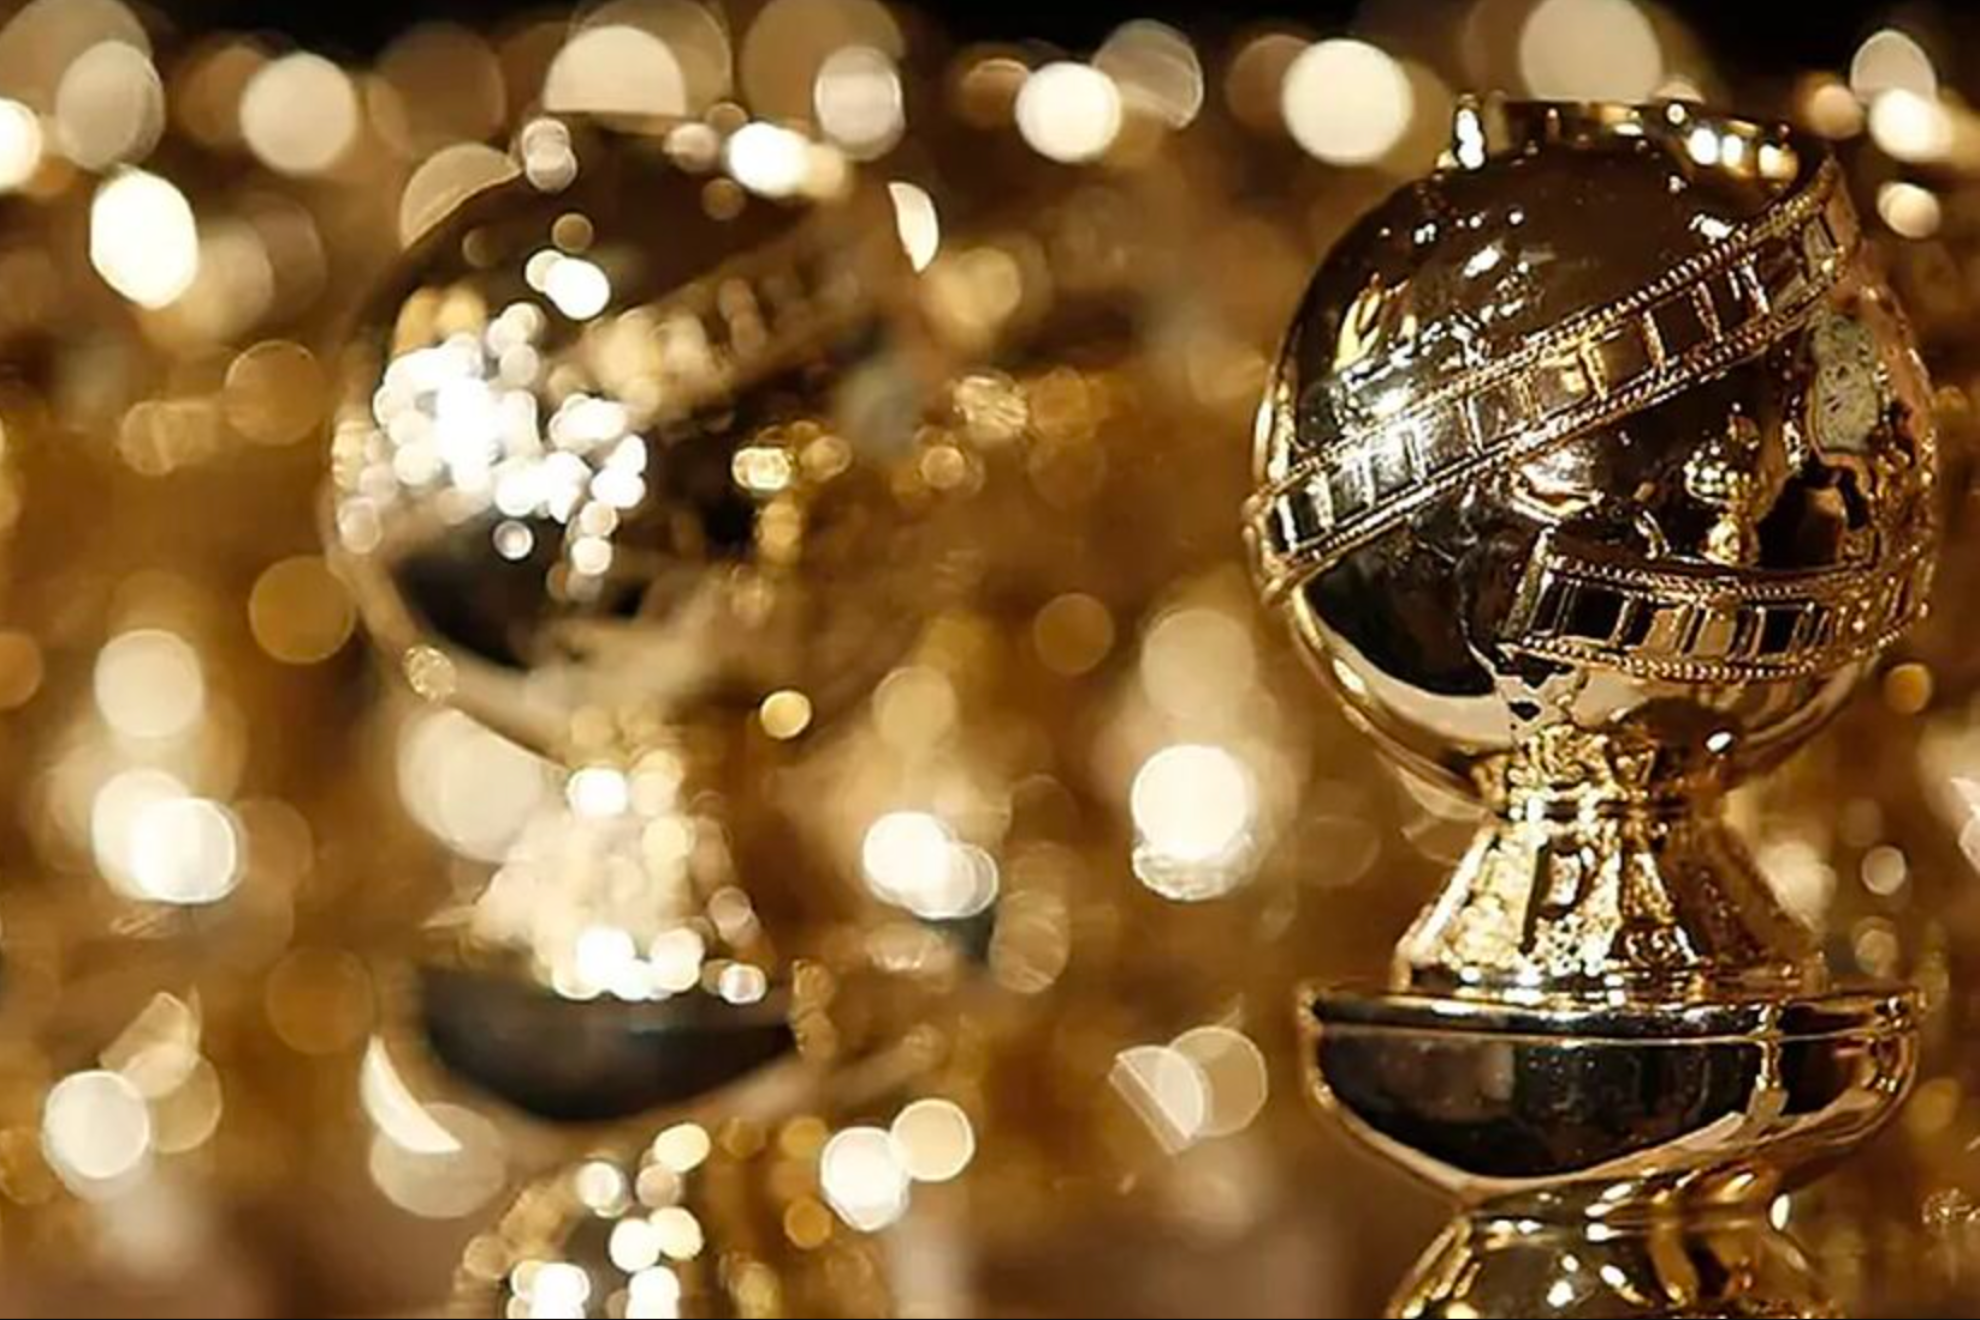 Golden Globes Voting: How does voting work to select every winner?